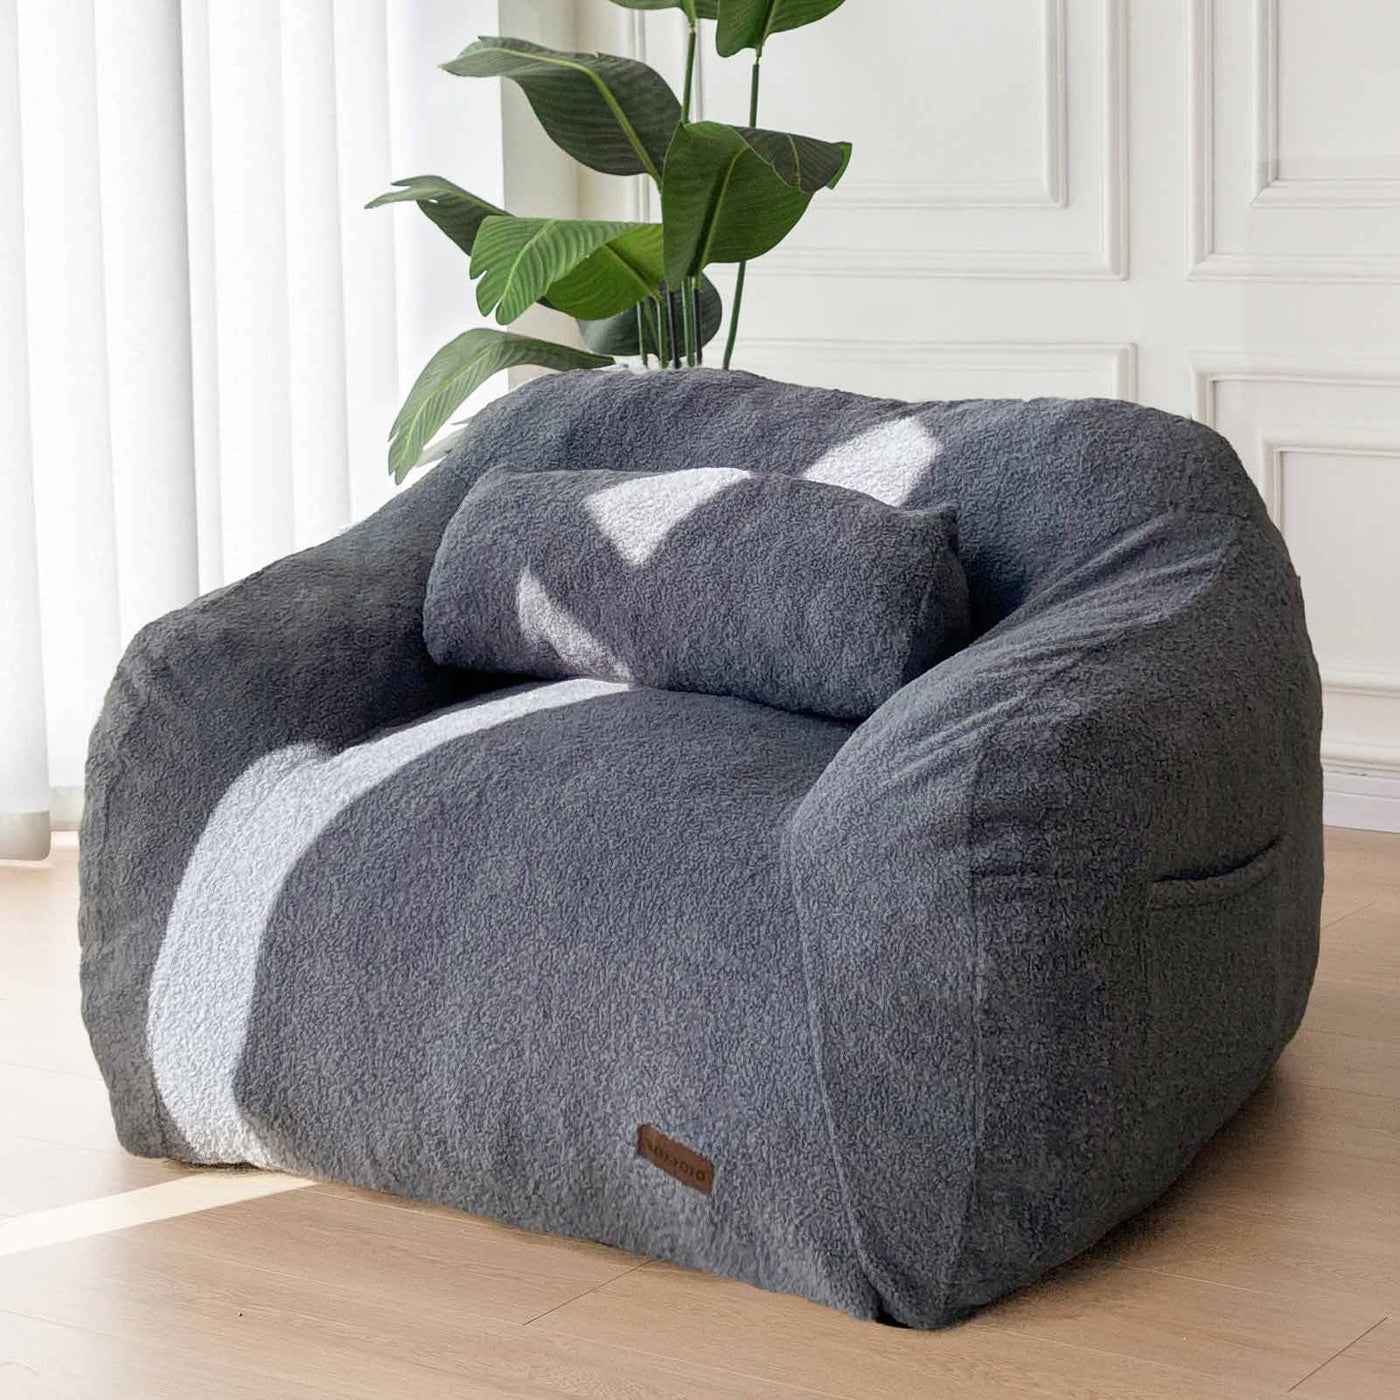 MAXYOYO Giant Bean Bag Chair with Pillow, Fuzzy Comfy Large Bean Bag Chair Couch for Reading and Gaming, Dusty Blue